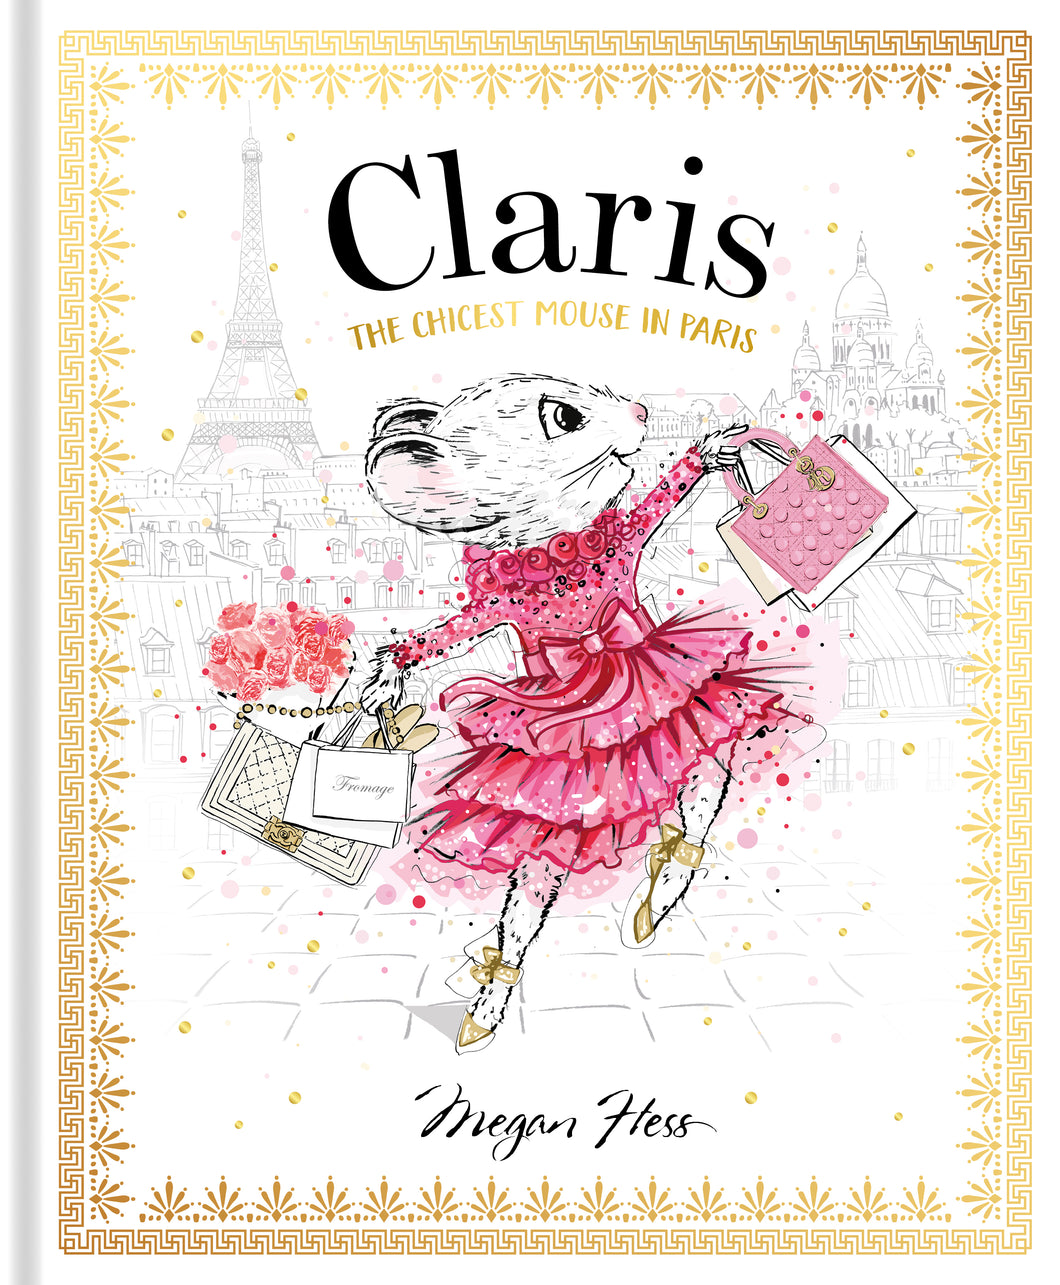 Claris The Chicest Mouse in Paris by Megan Hess